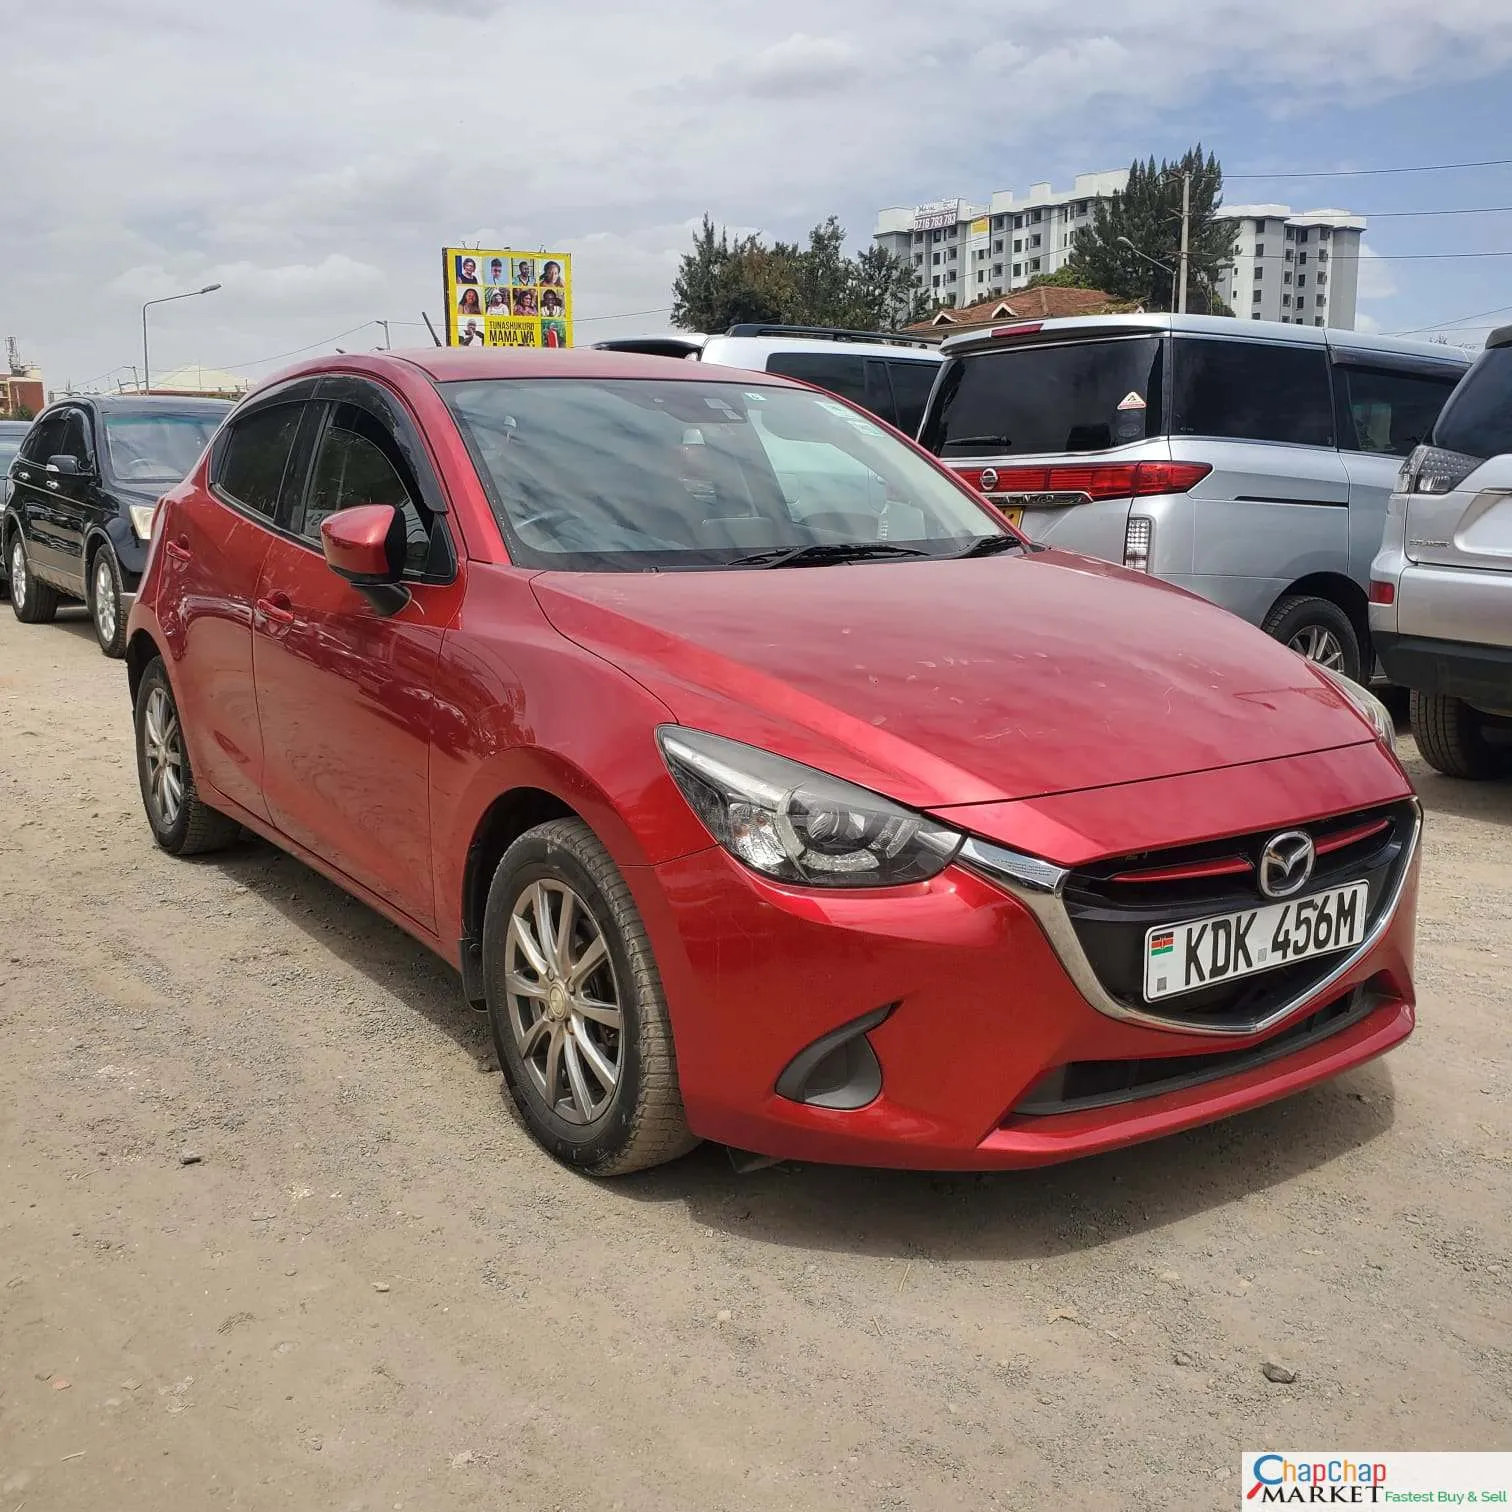 Cars Cars For Sale-Mazda Demio asian You Pay 30% DEPOSIT TRADE IN OK EXCLUSIVE demio for sale in kenya hire purchase installments 10